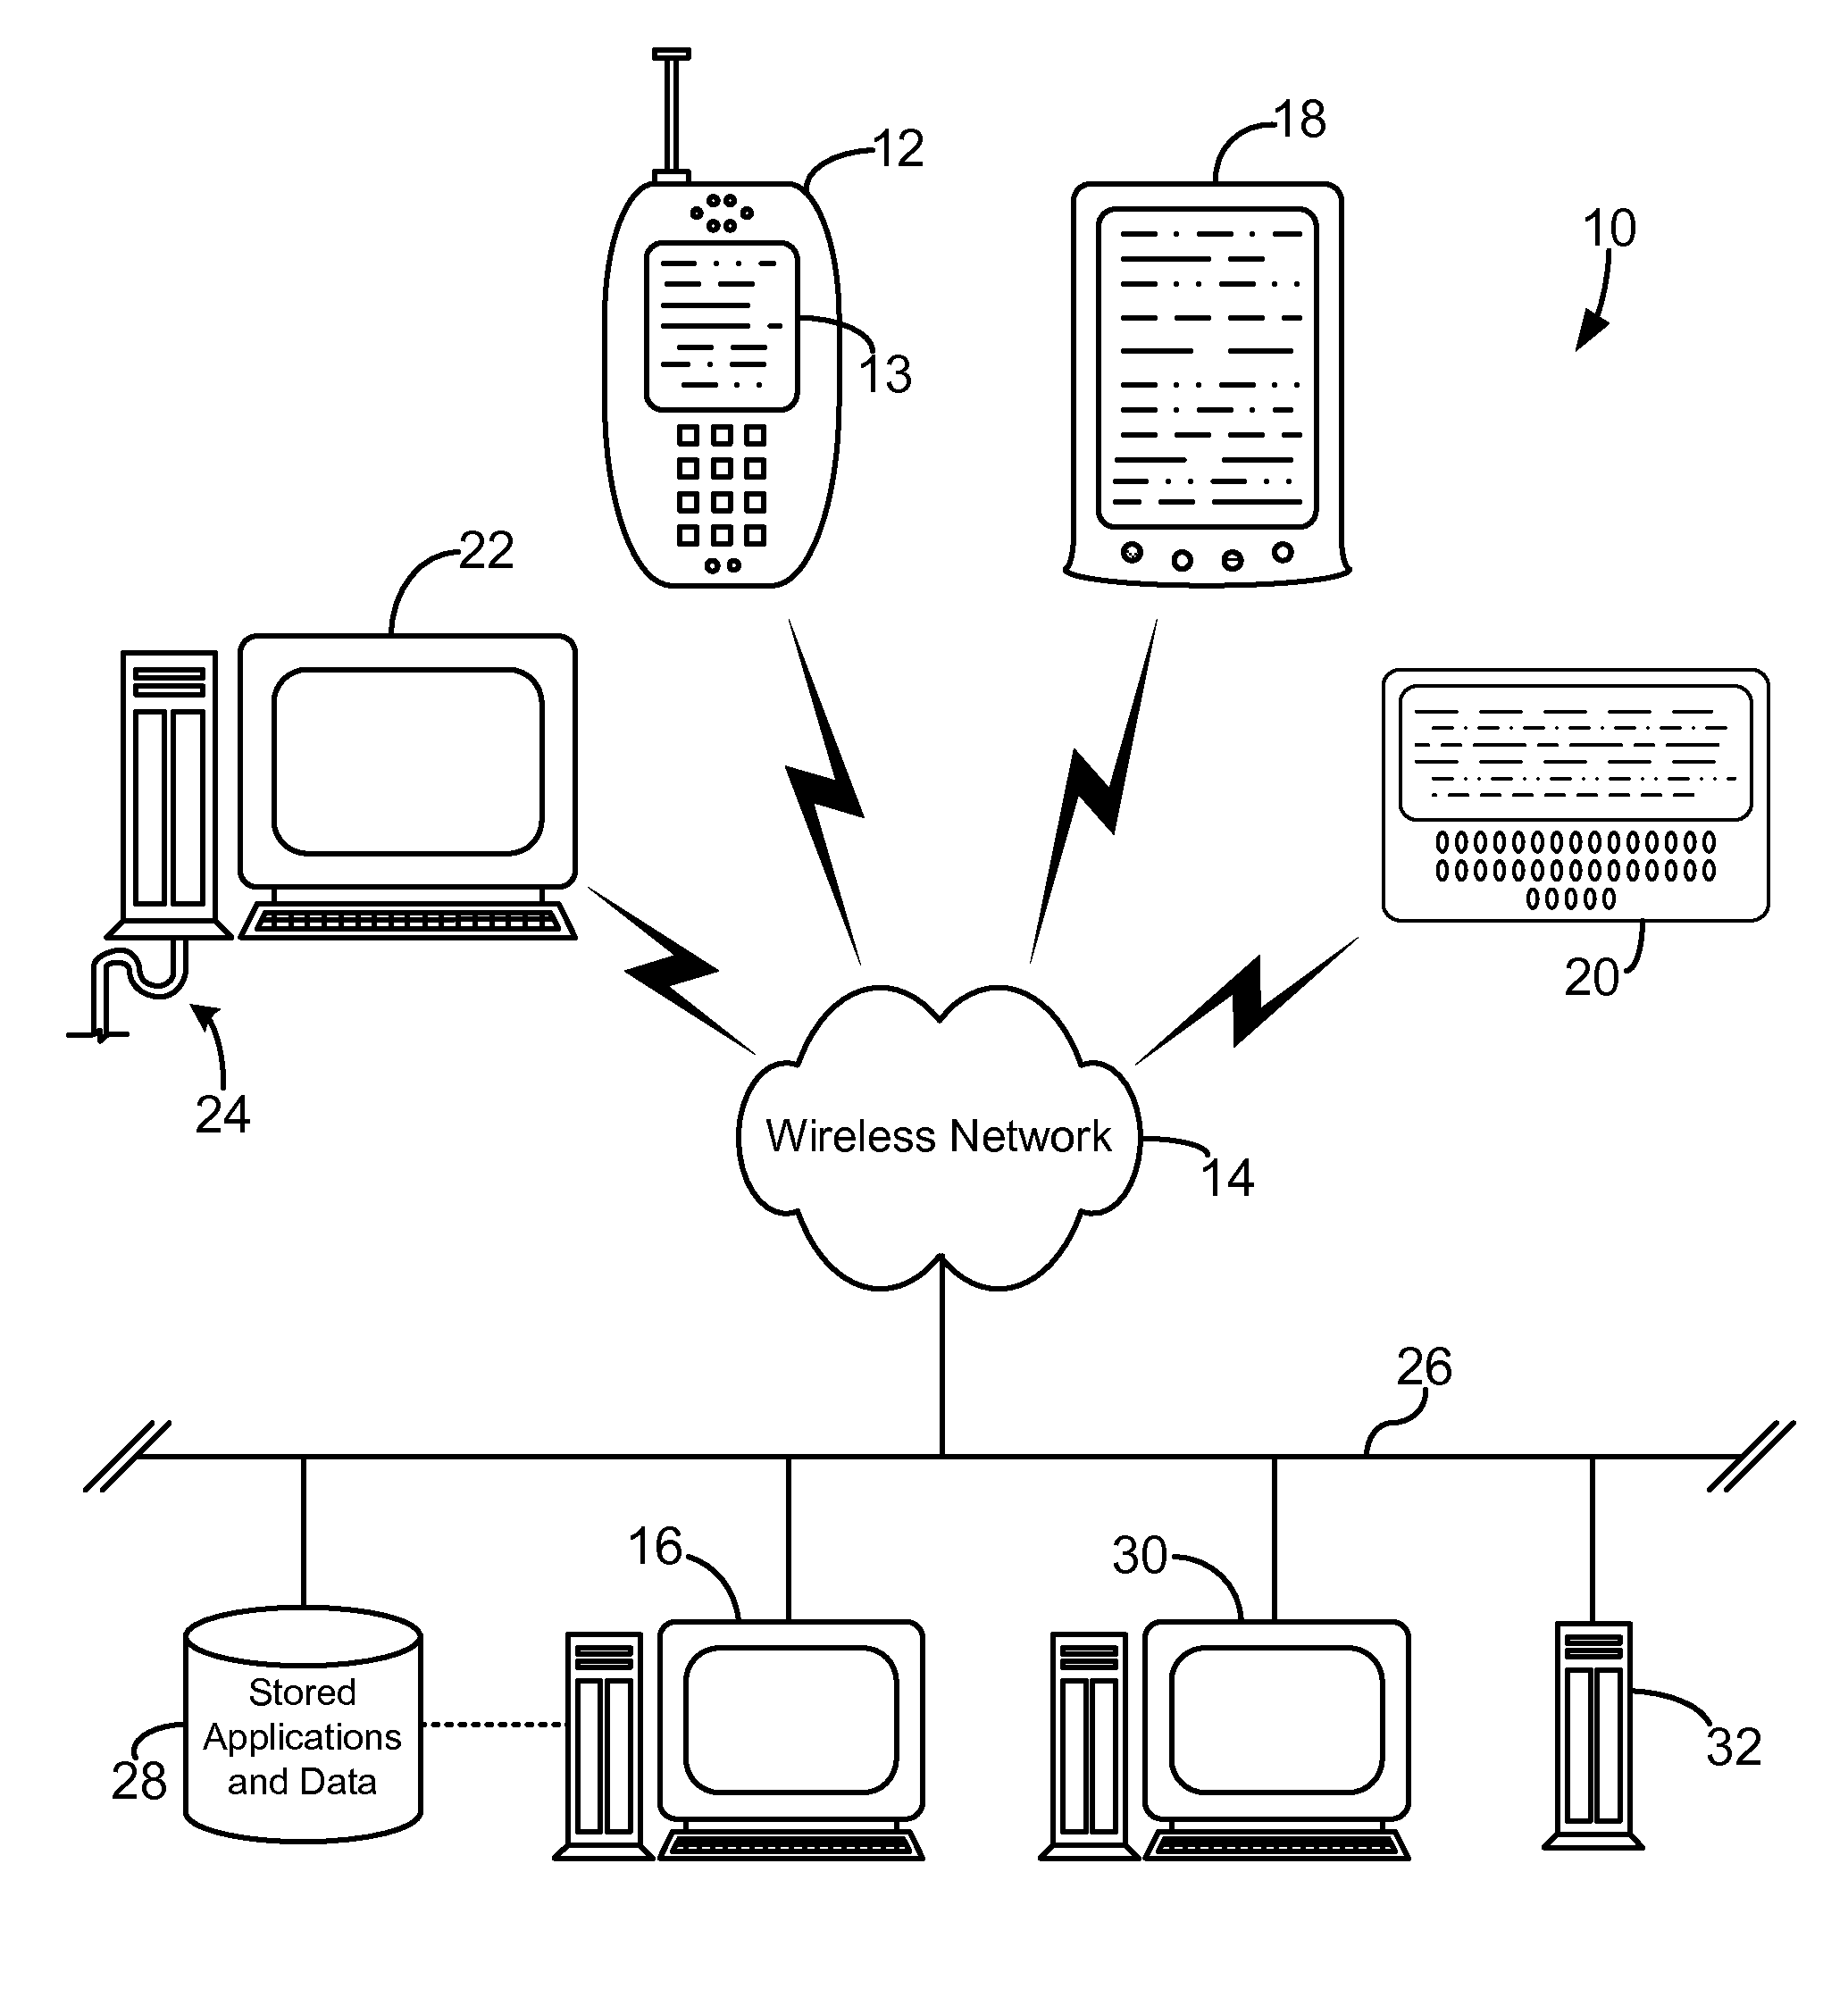 Application catalog on an application server for wireless devices